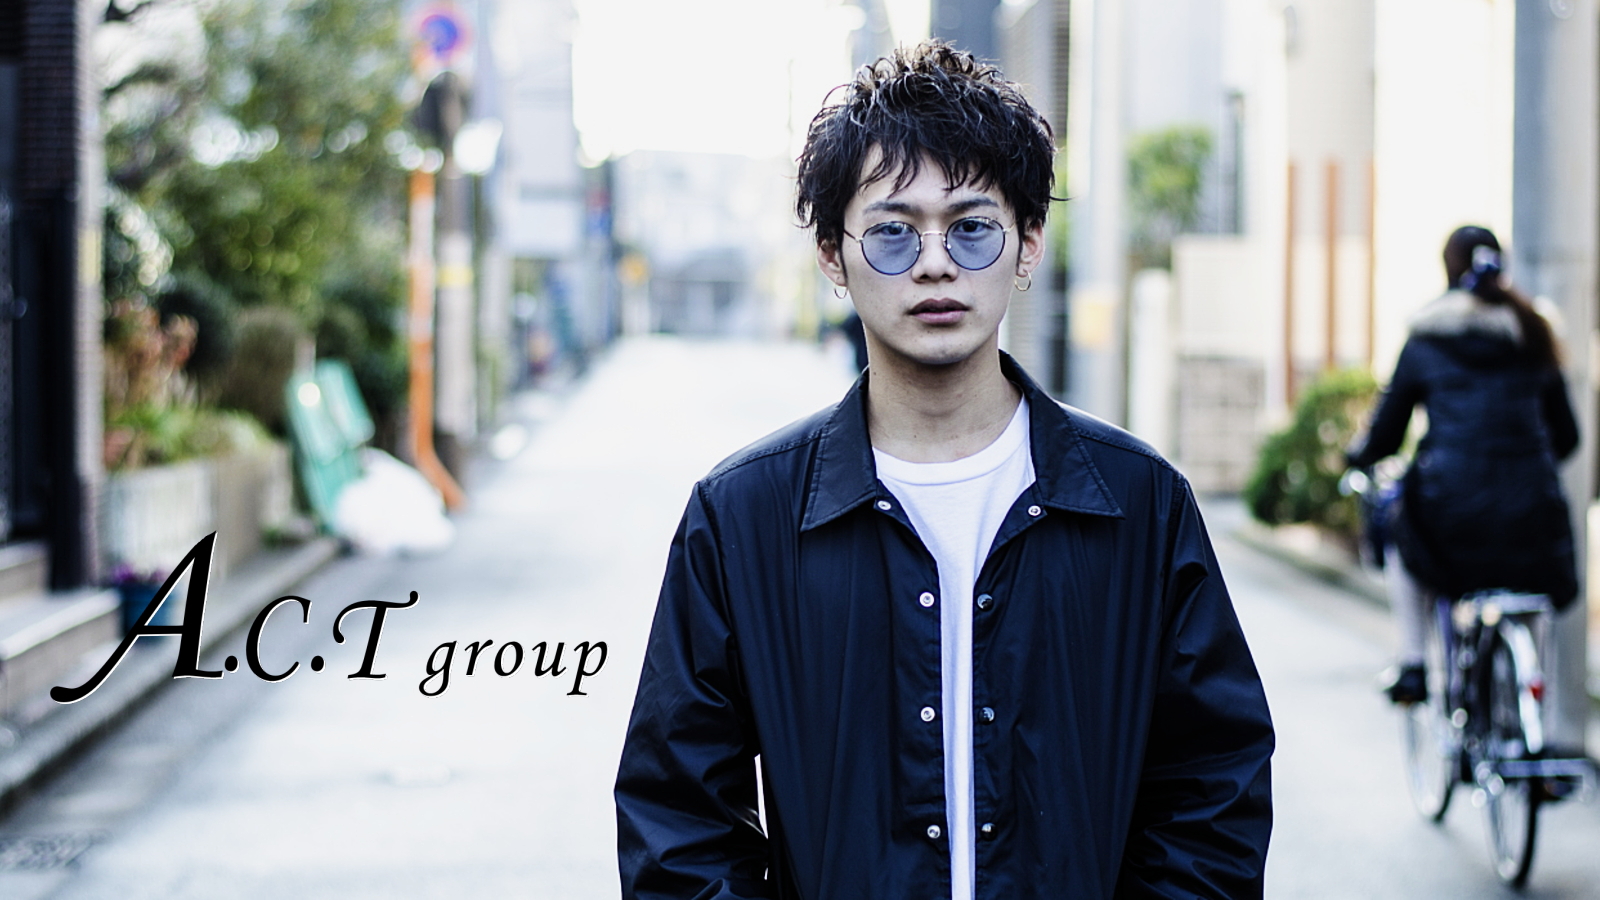 ACT GROUP（アクト グループ）